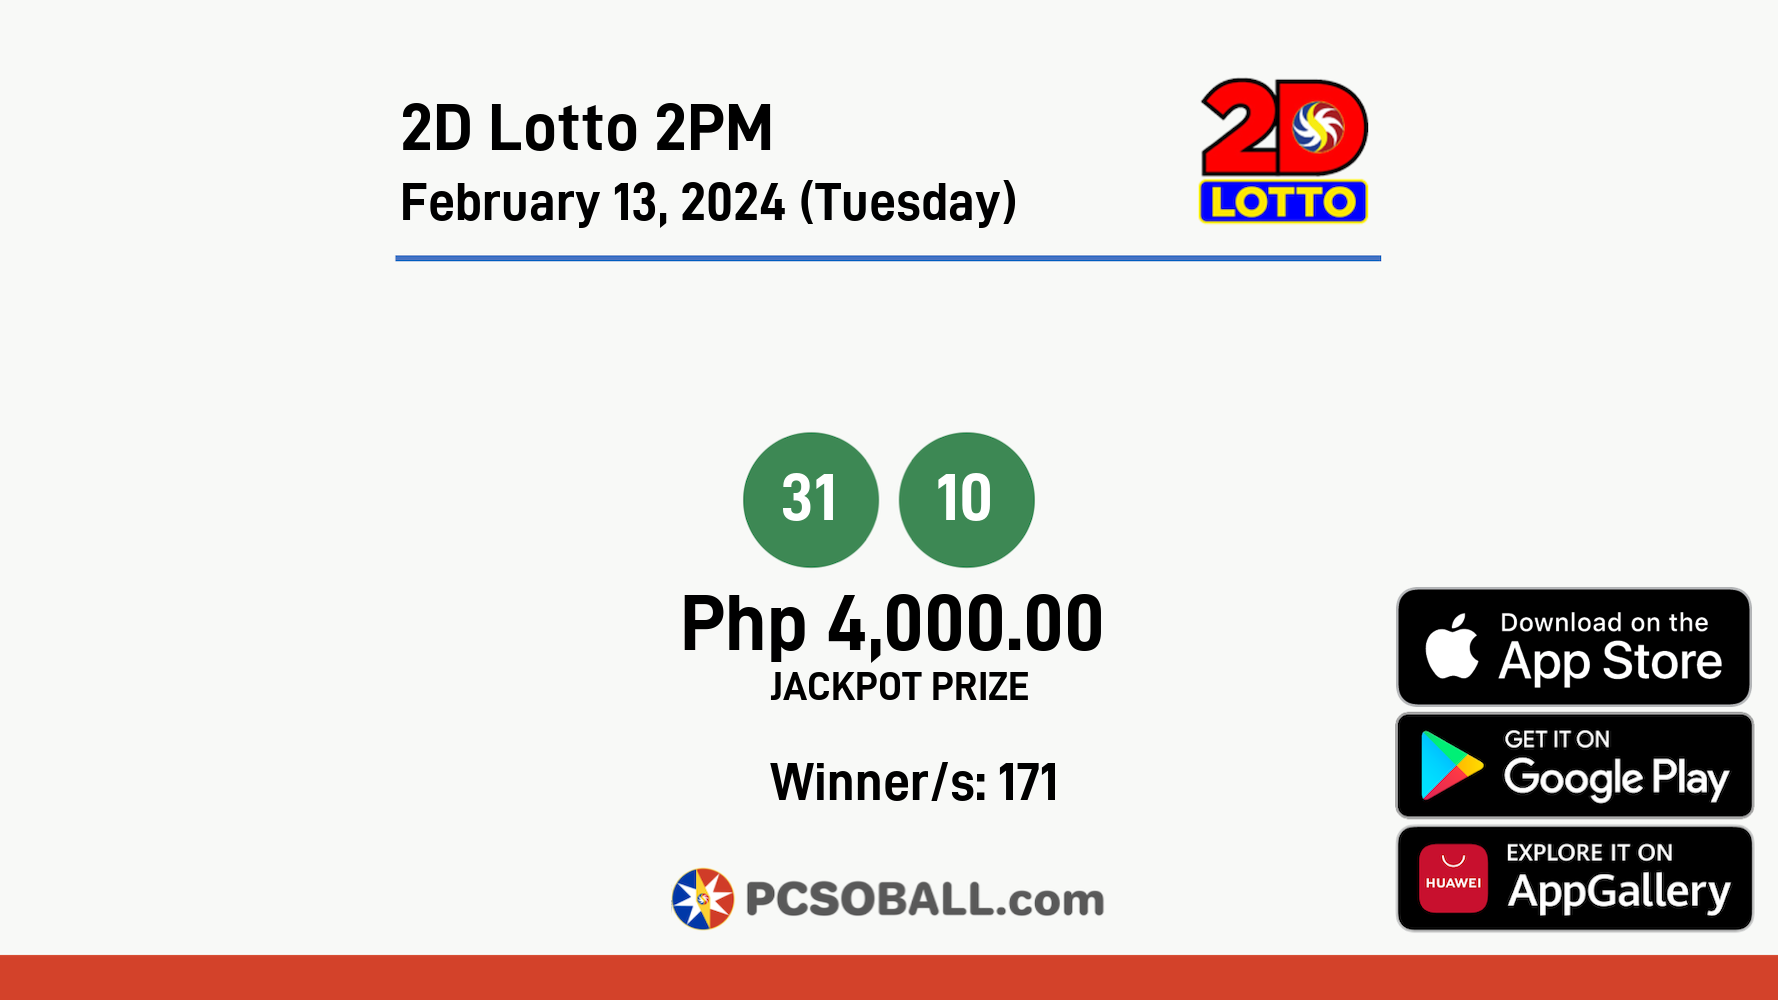 2D Lotto 2PM February 13, 2024 (Tuesday) Result